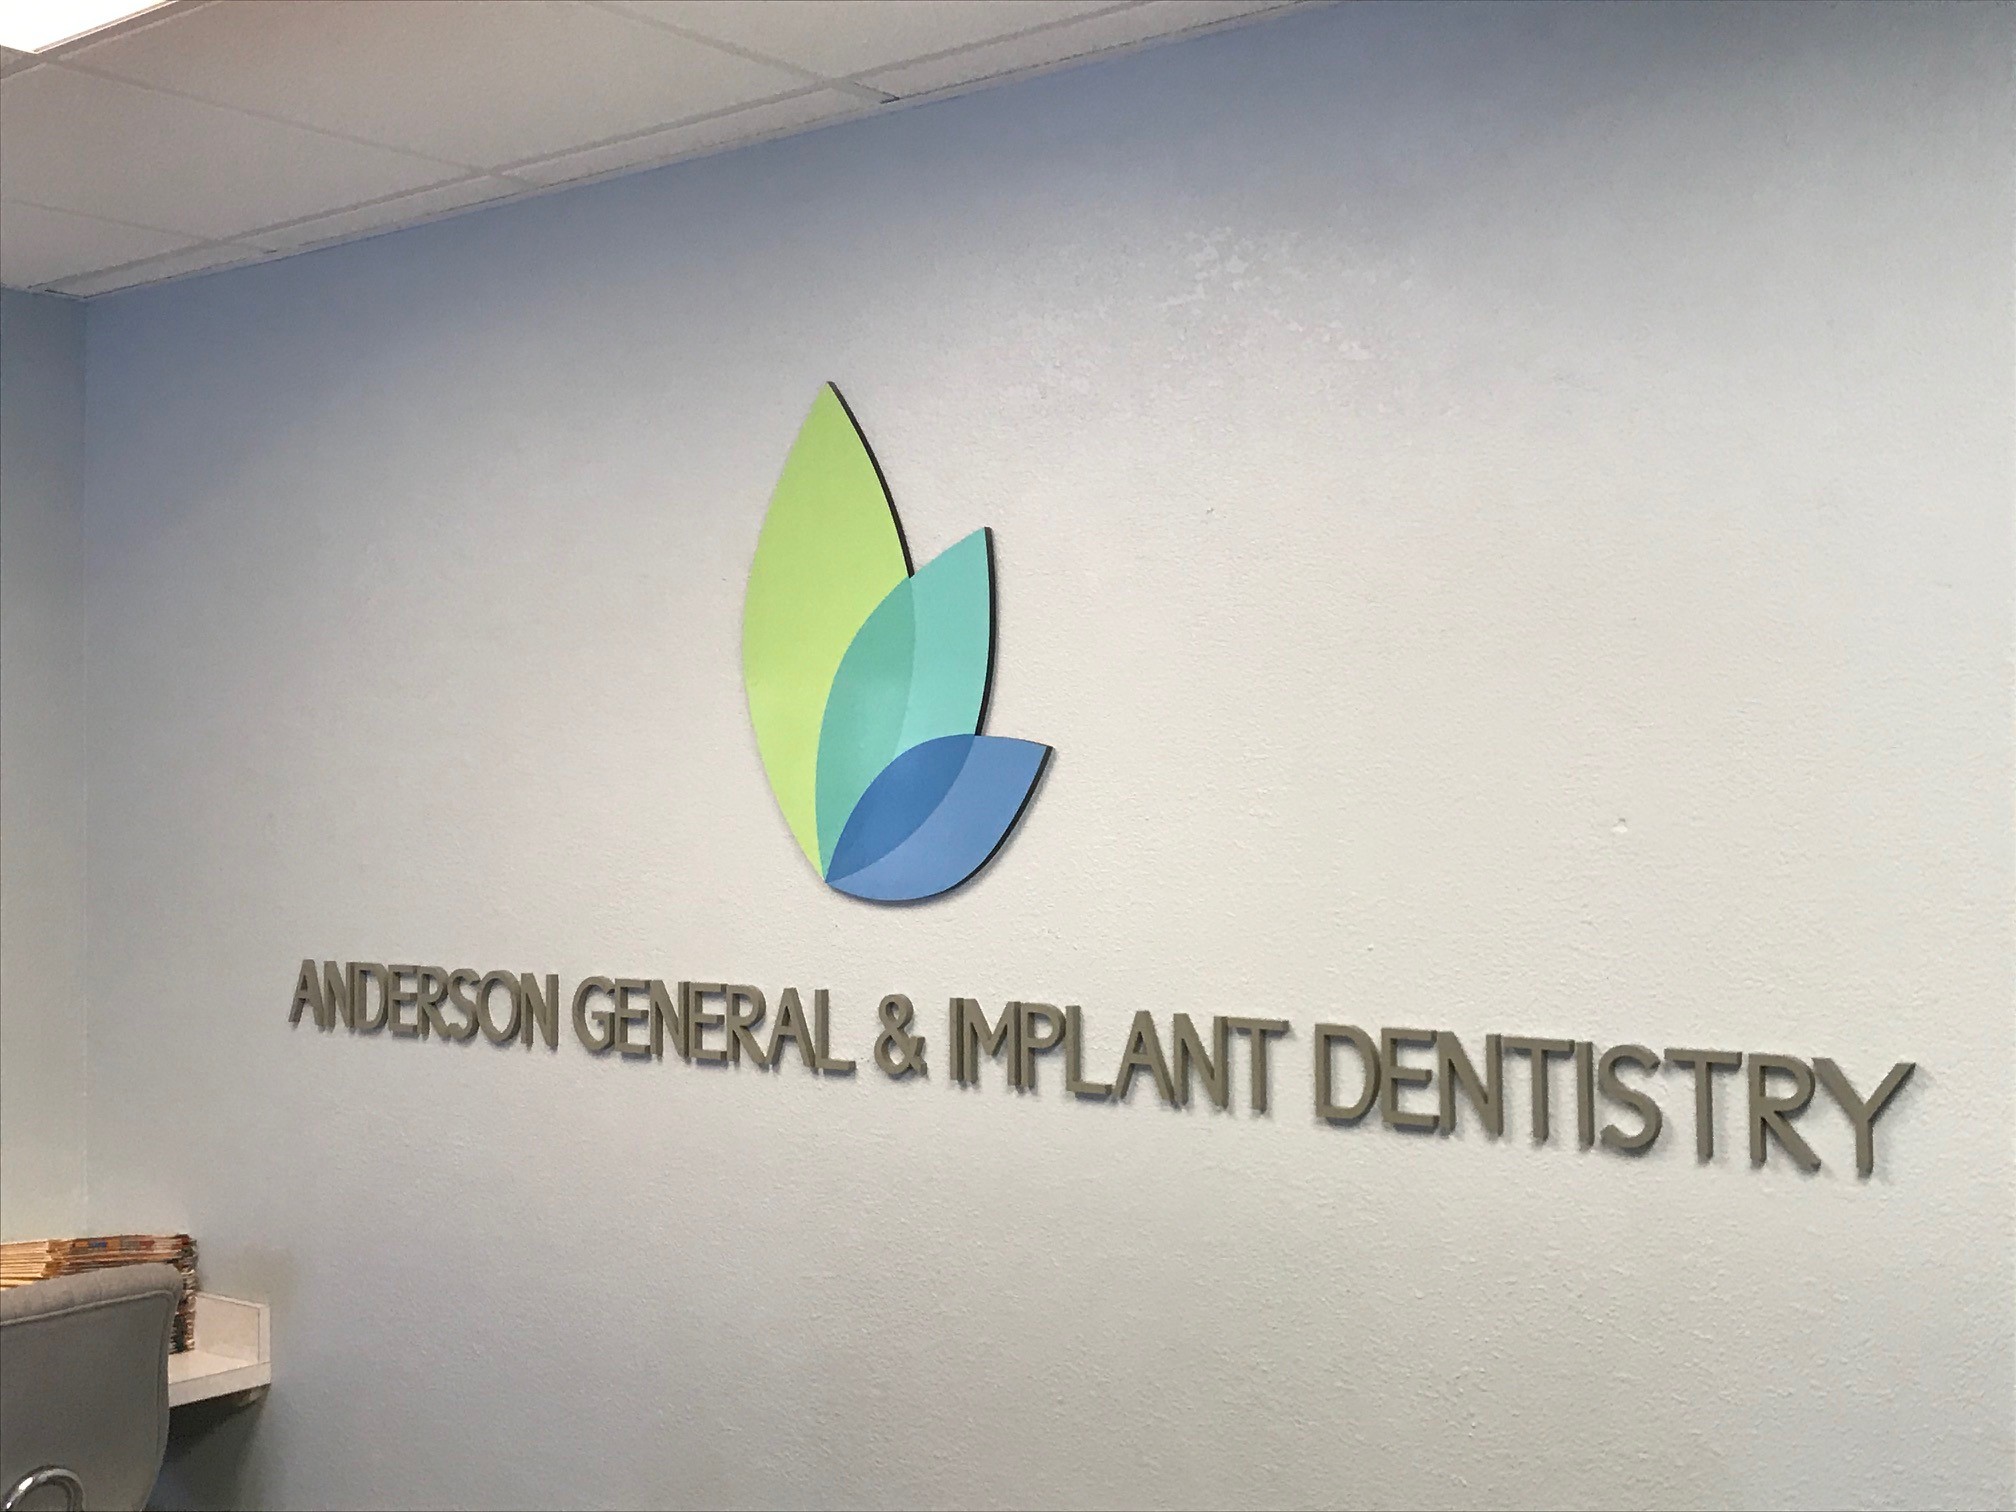 Anderson General & Implant Dentistry Lobby Signs Made By Optimum Signs in Milwaukee